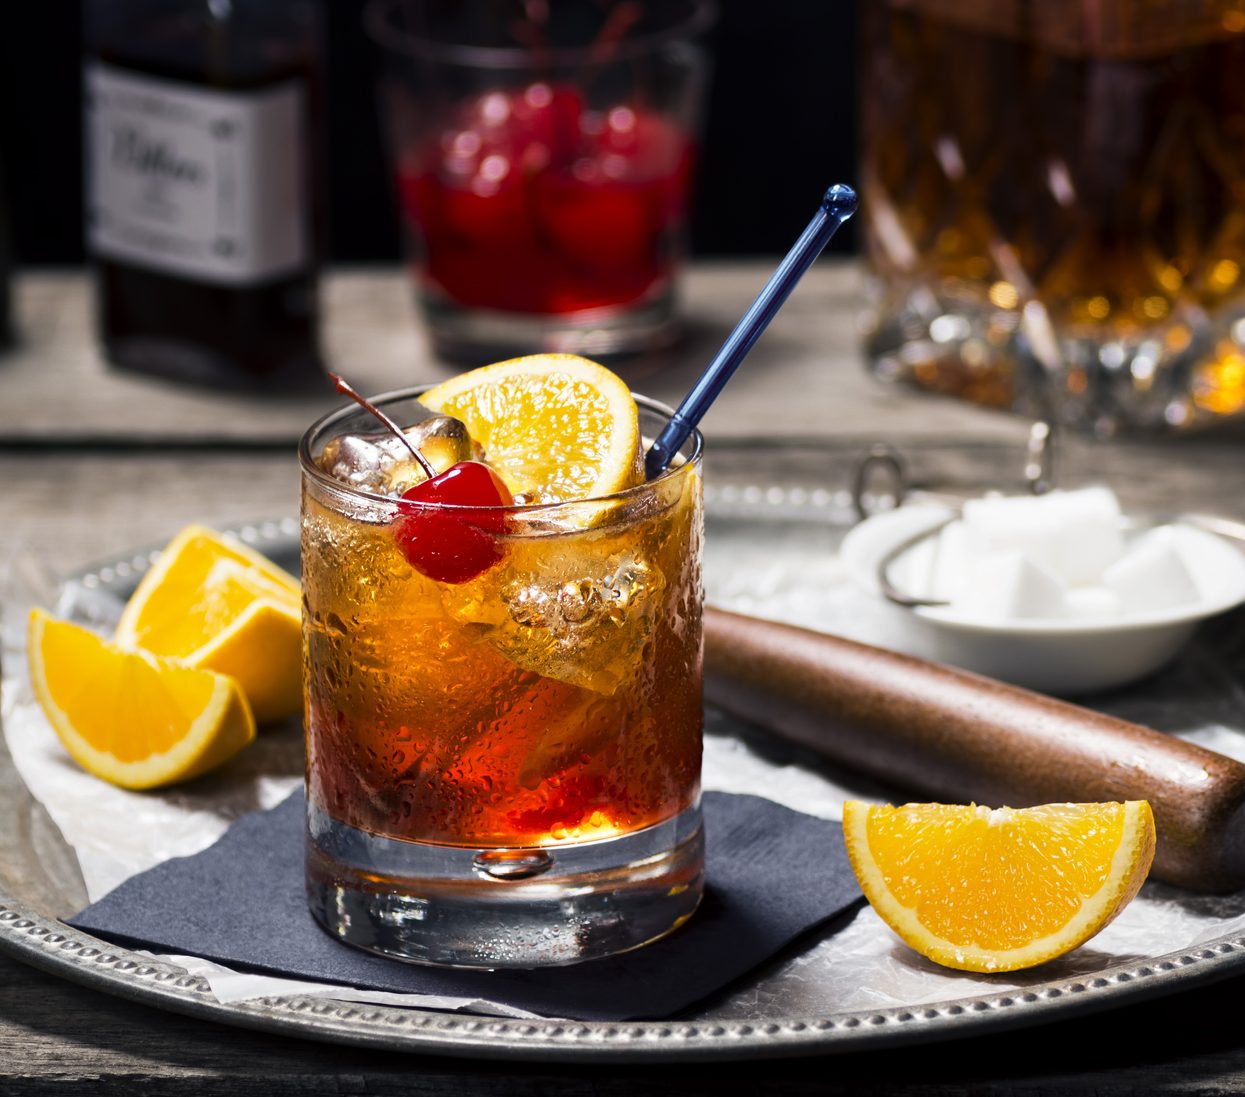 Take The Chill Off With These Scotch Whisky Cocktails | PURSUIT